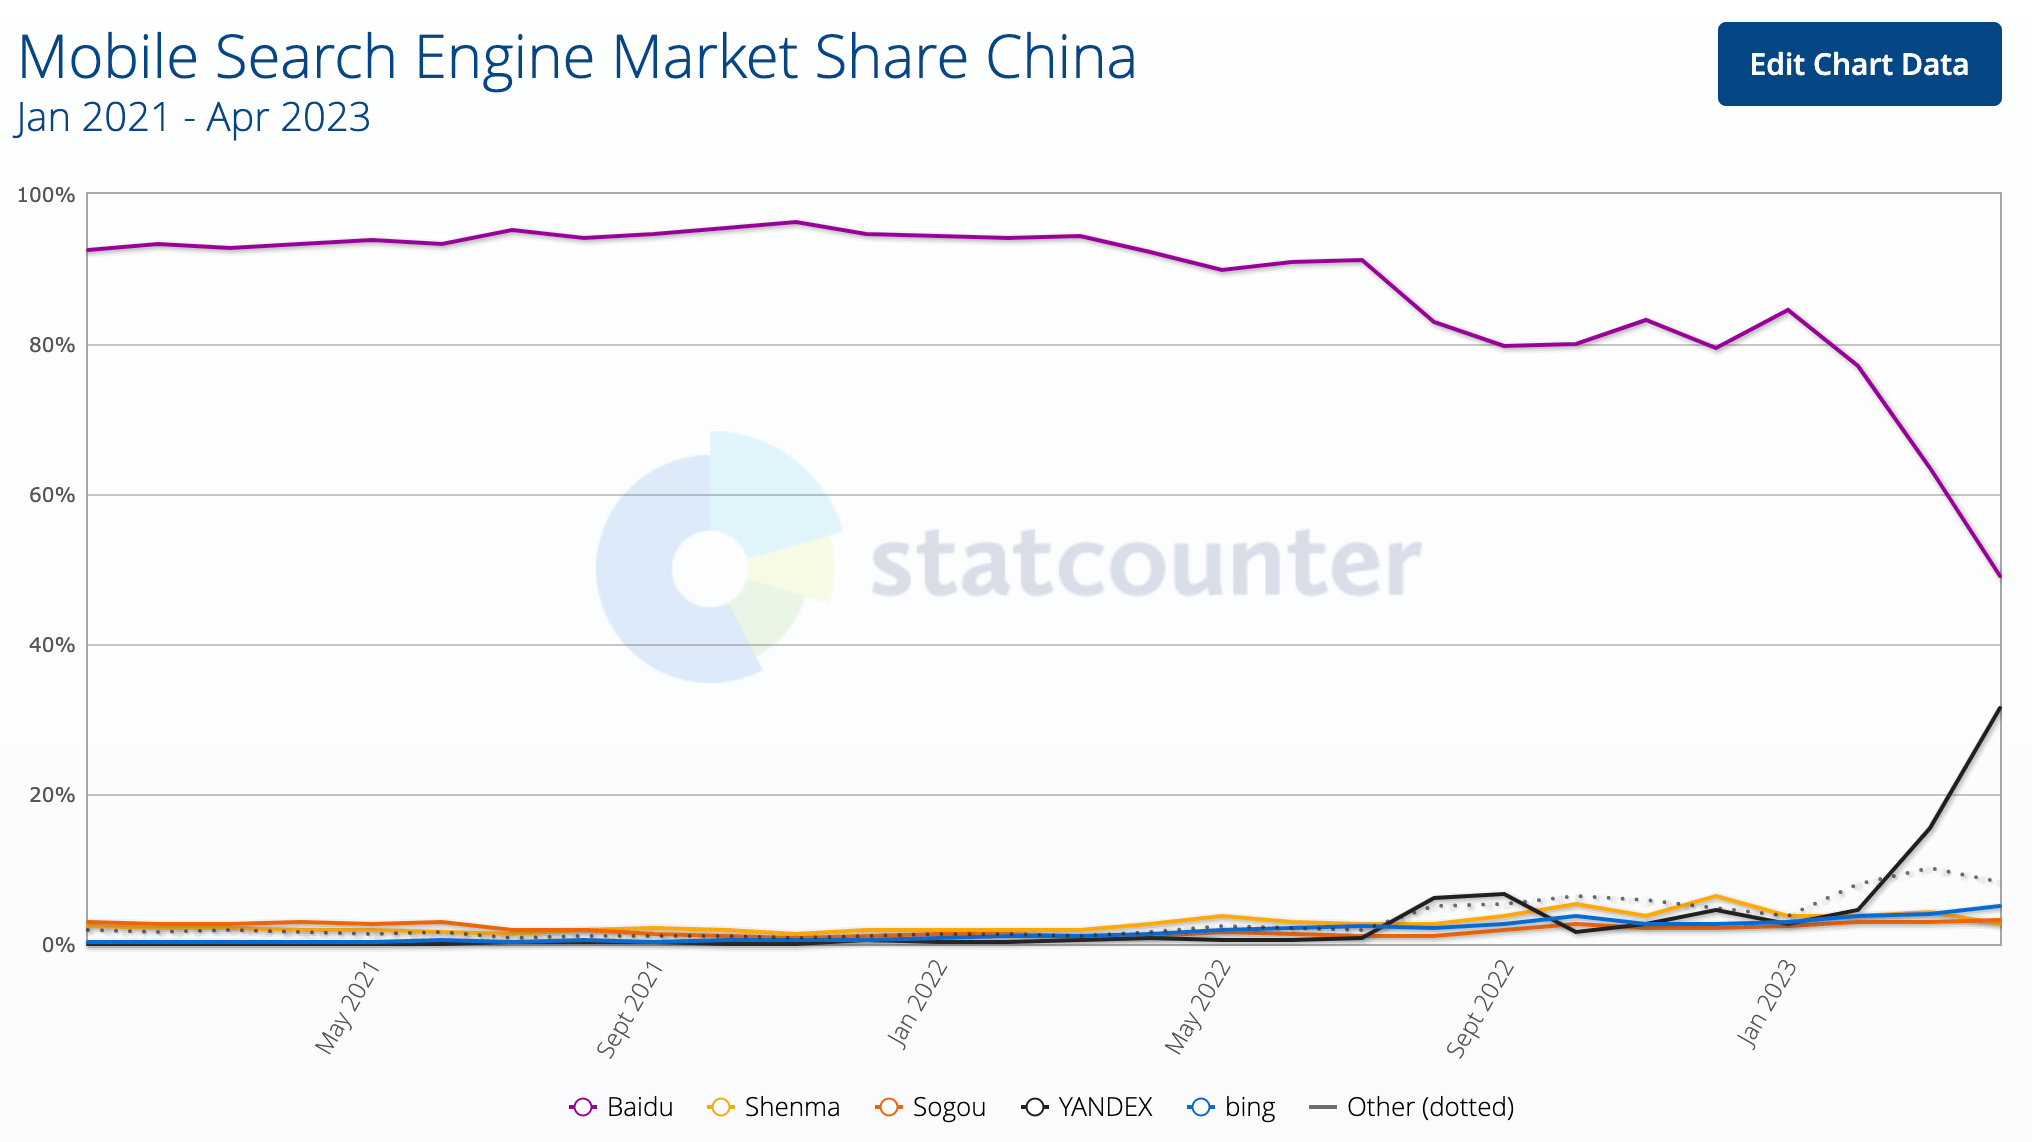 GS-Statcounter's Mobile Search Engine Market Share in China: Yandex rising significantly